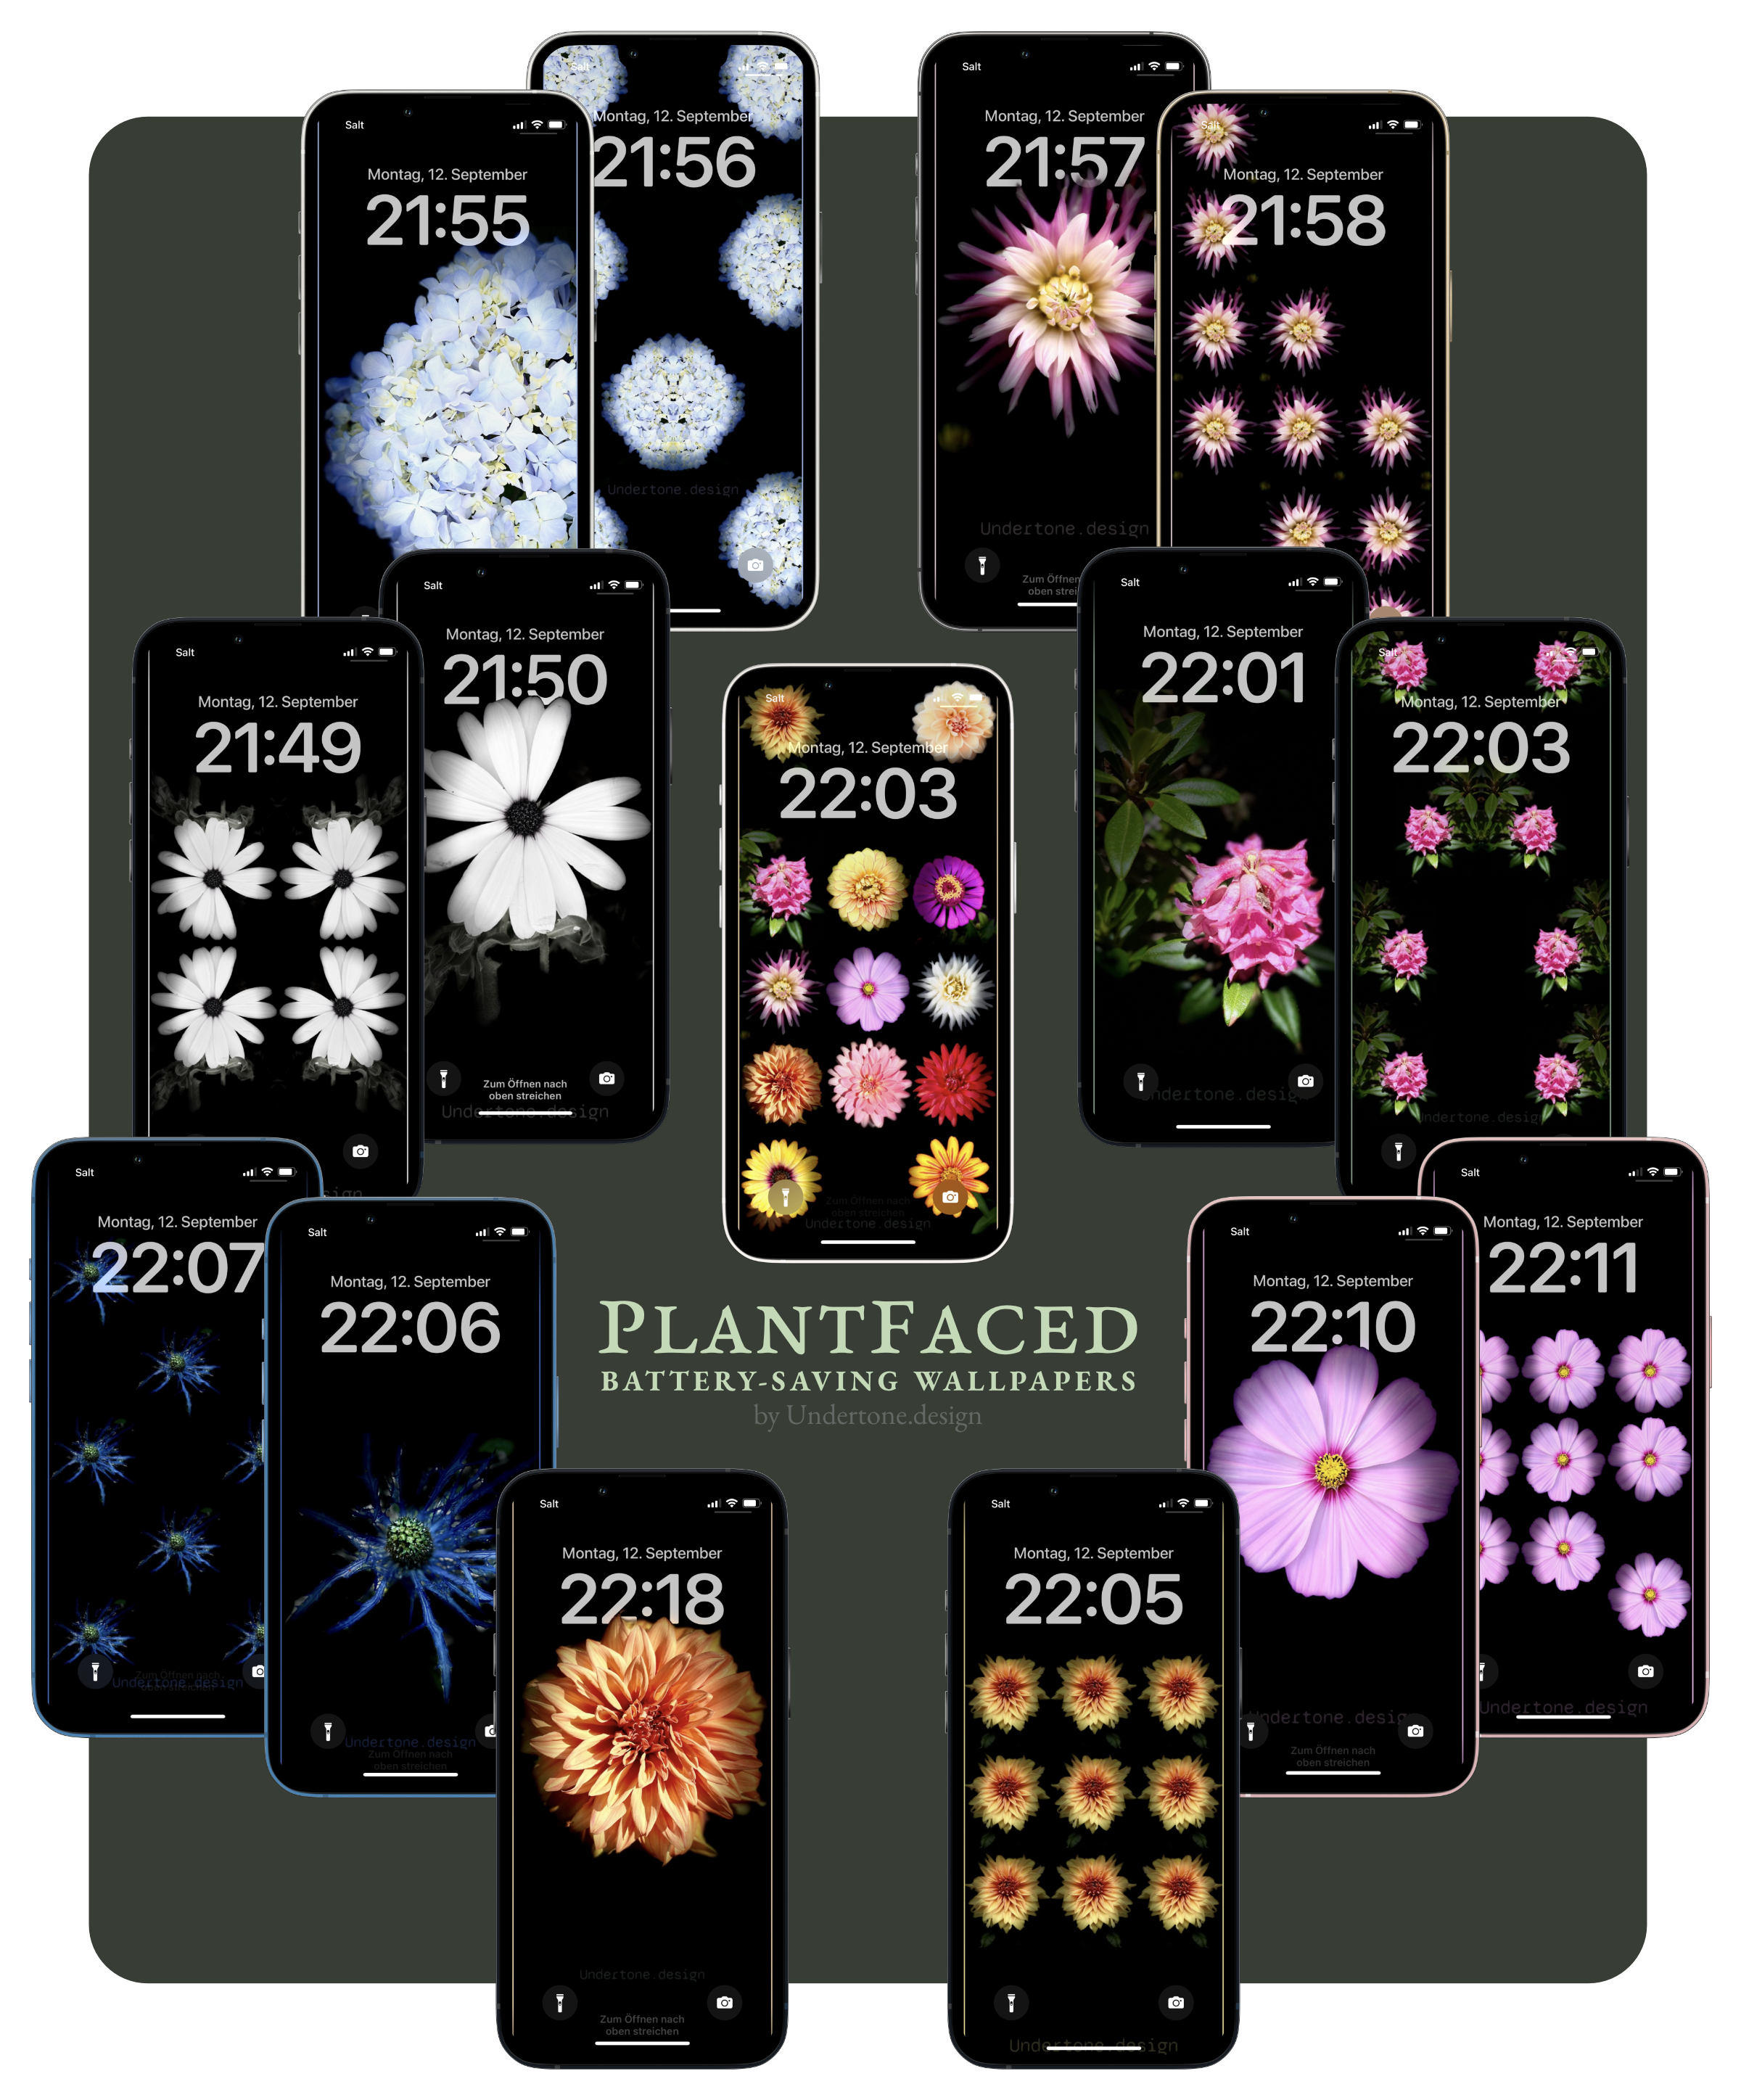 #PlantFaced collection of energy-saving mobile device wallpapers based on flowers created by Fabio Crameri at Undertone.design.